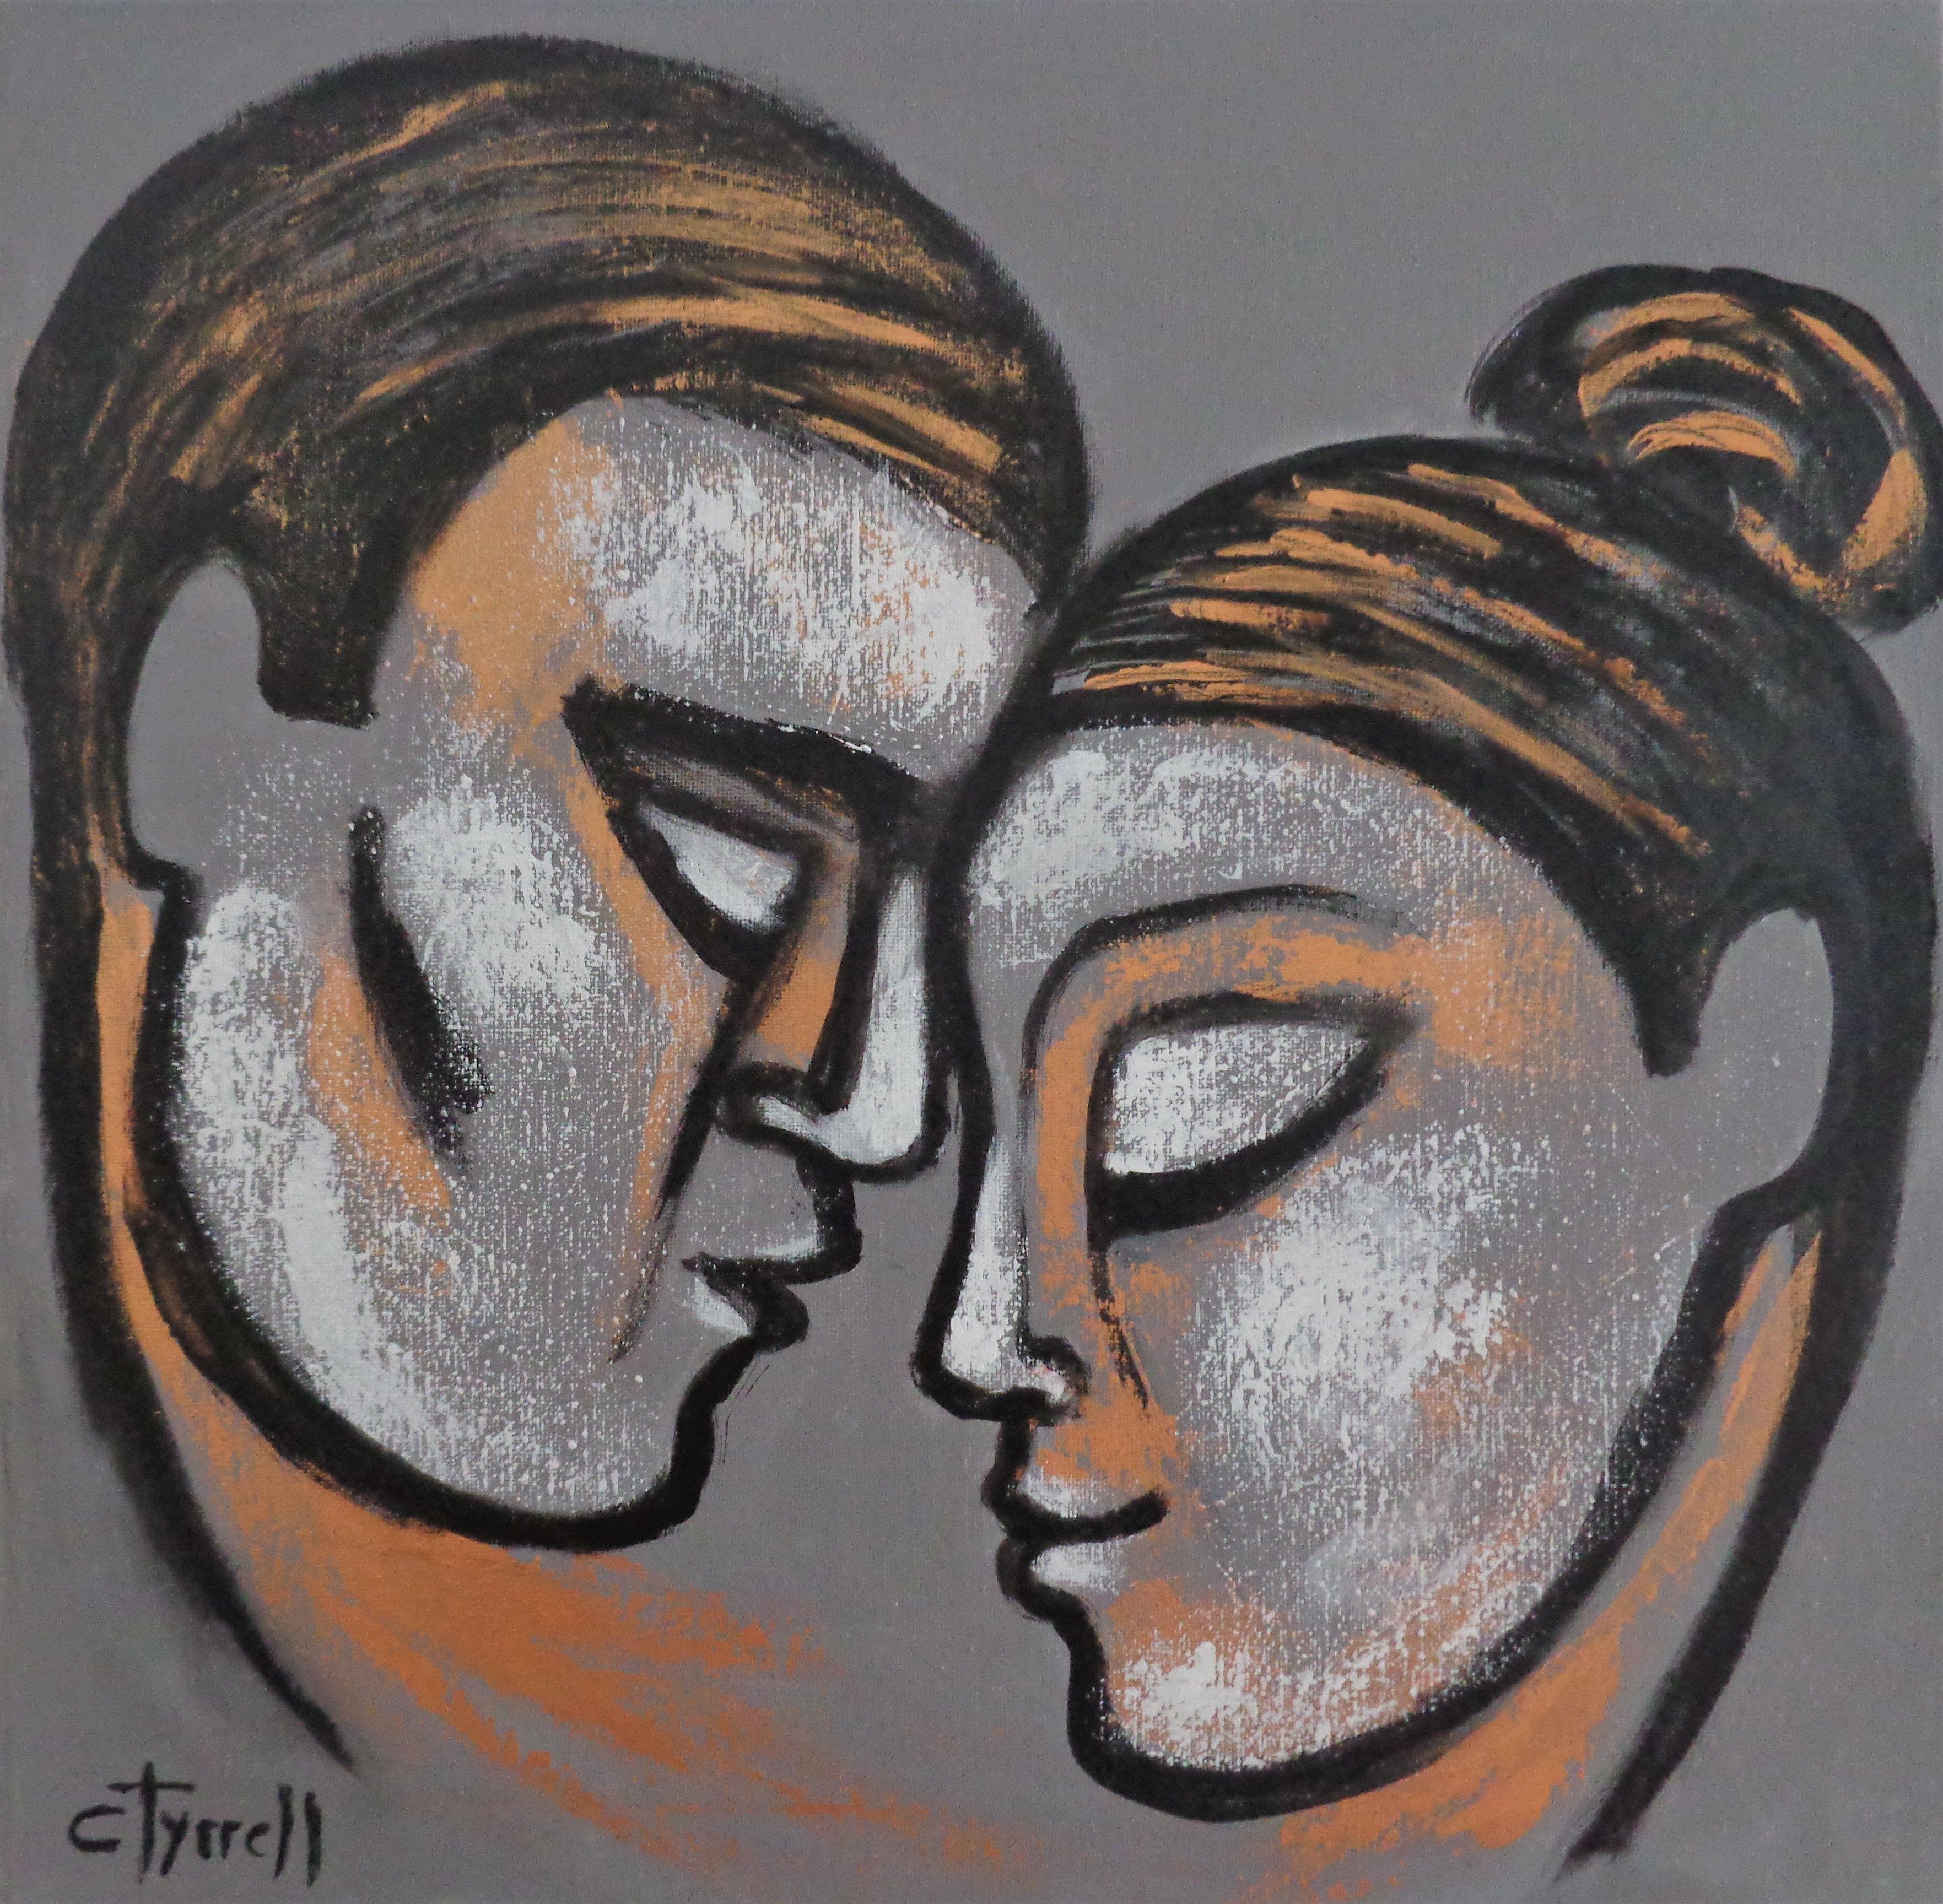 Original contemporary figurative painting on square canvas, painted edges and ready to hang. Part of the series, showing emotional portrait of couples sharing their love and comfort. Made using grey, black, white and iridescent copper acrylics. Size